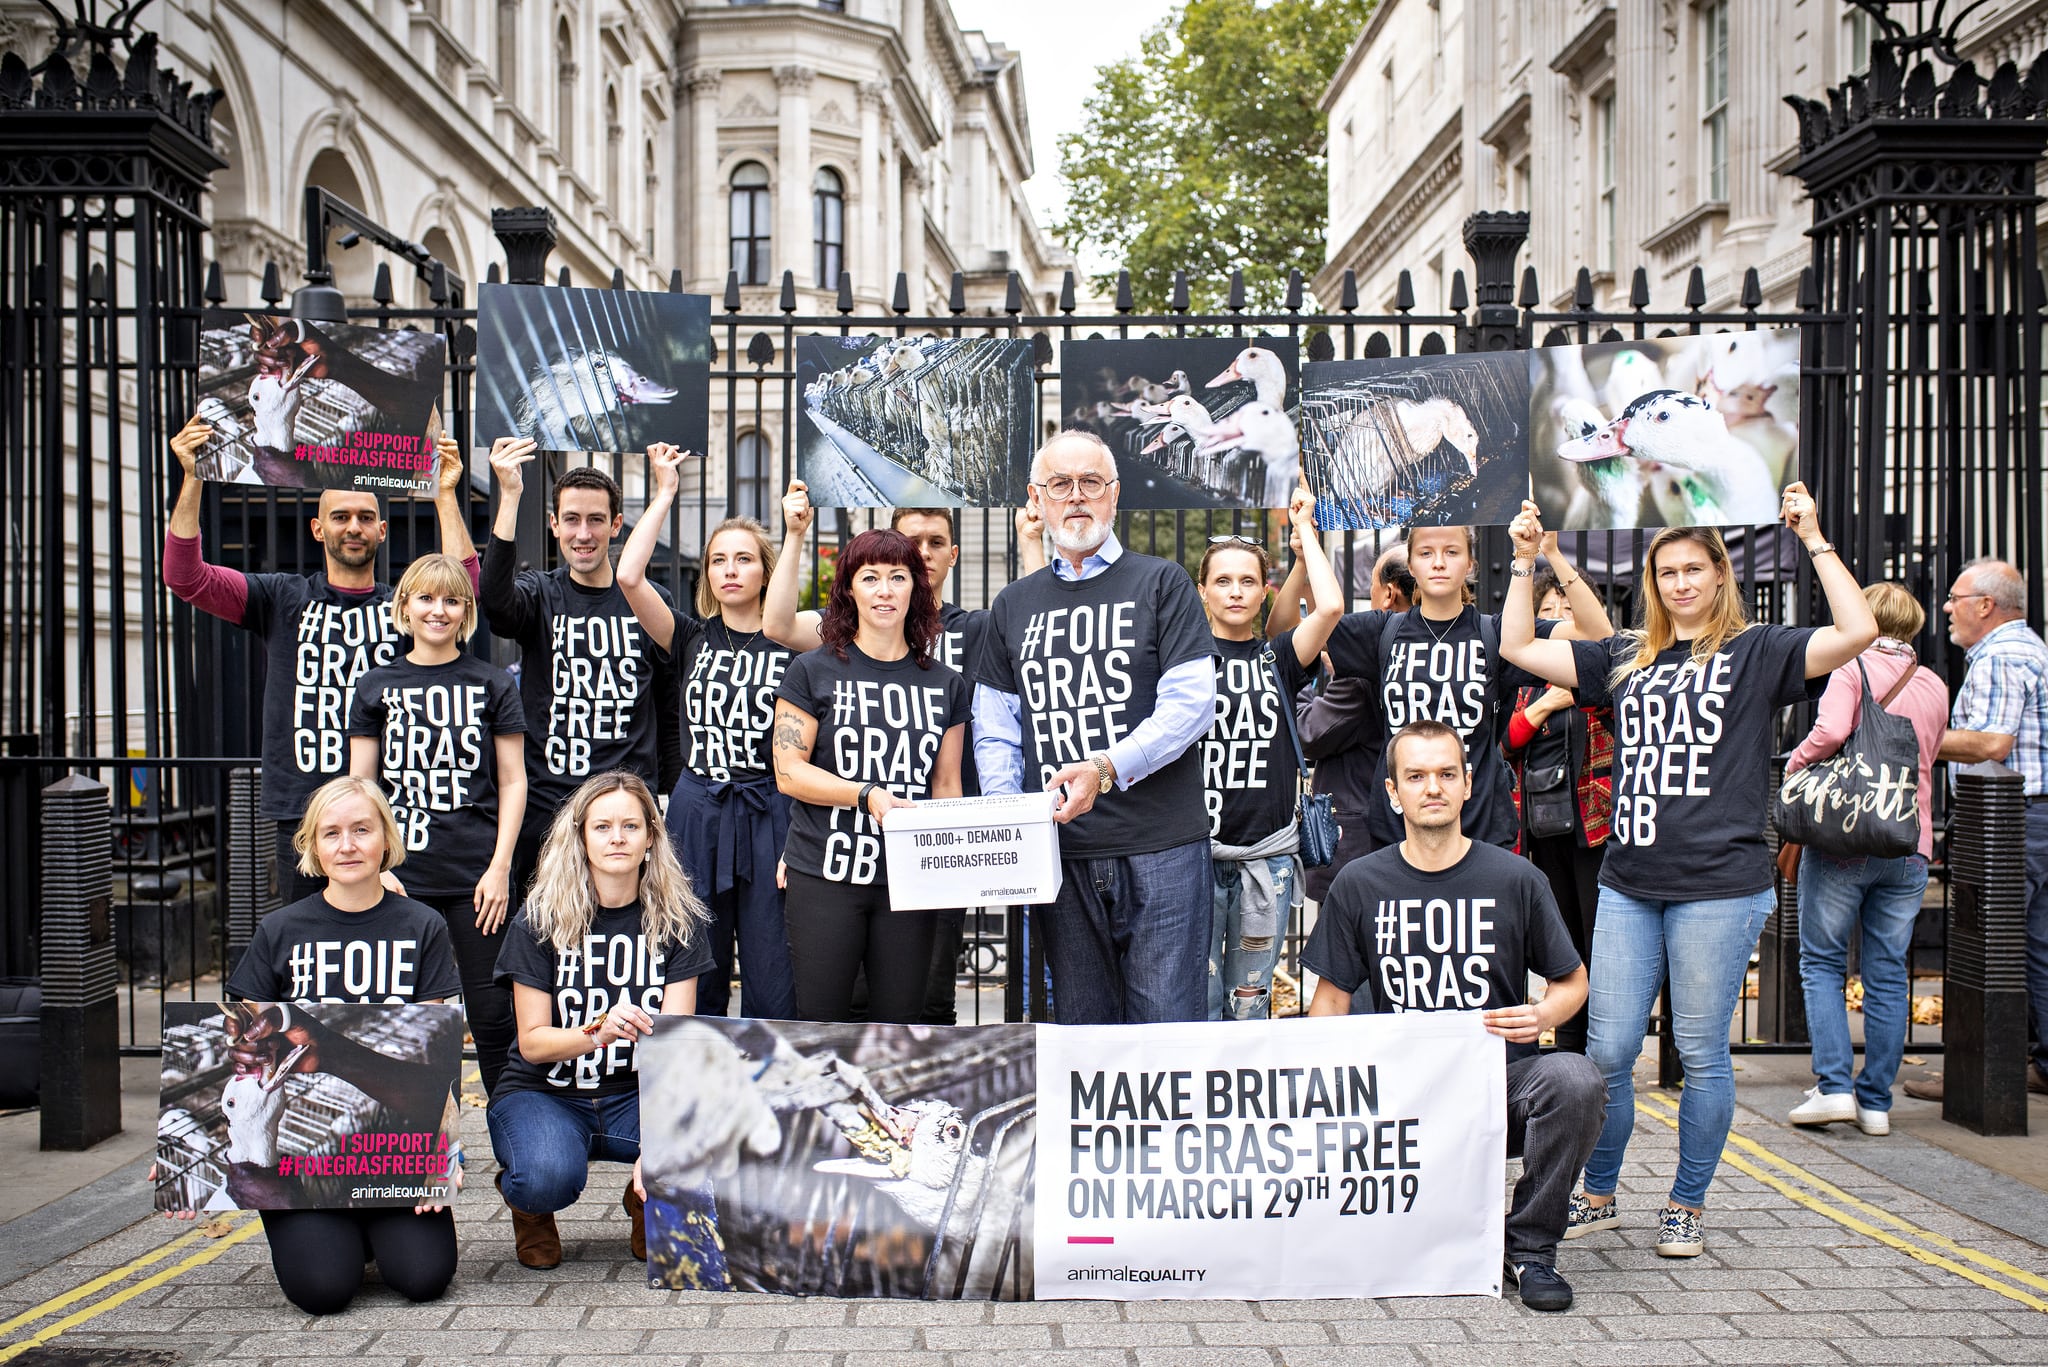 Foie Gras petition led by celebrities and campaigners